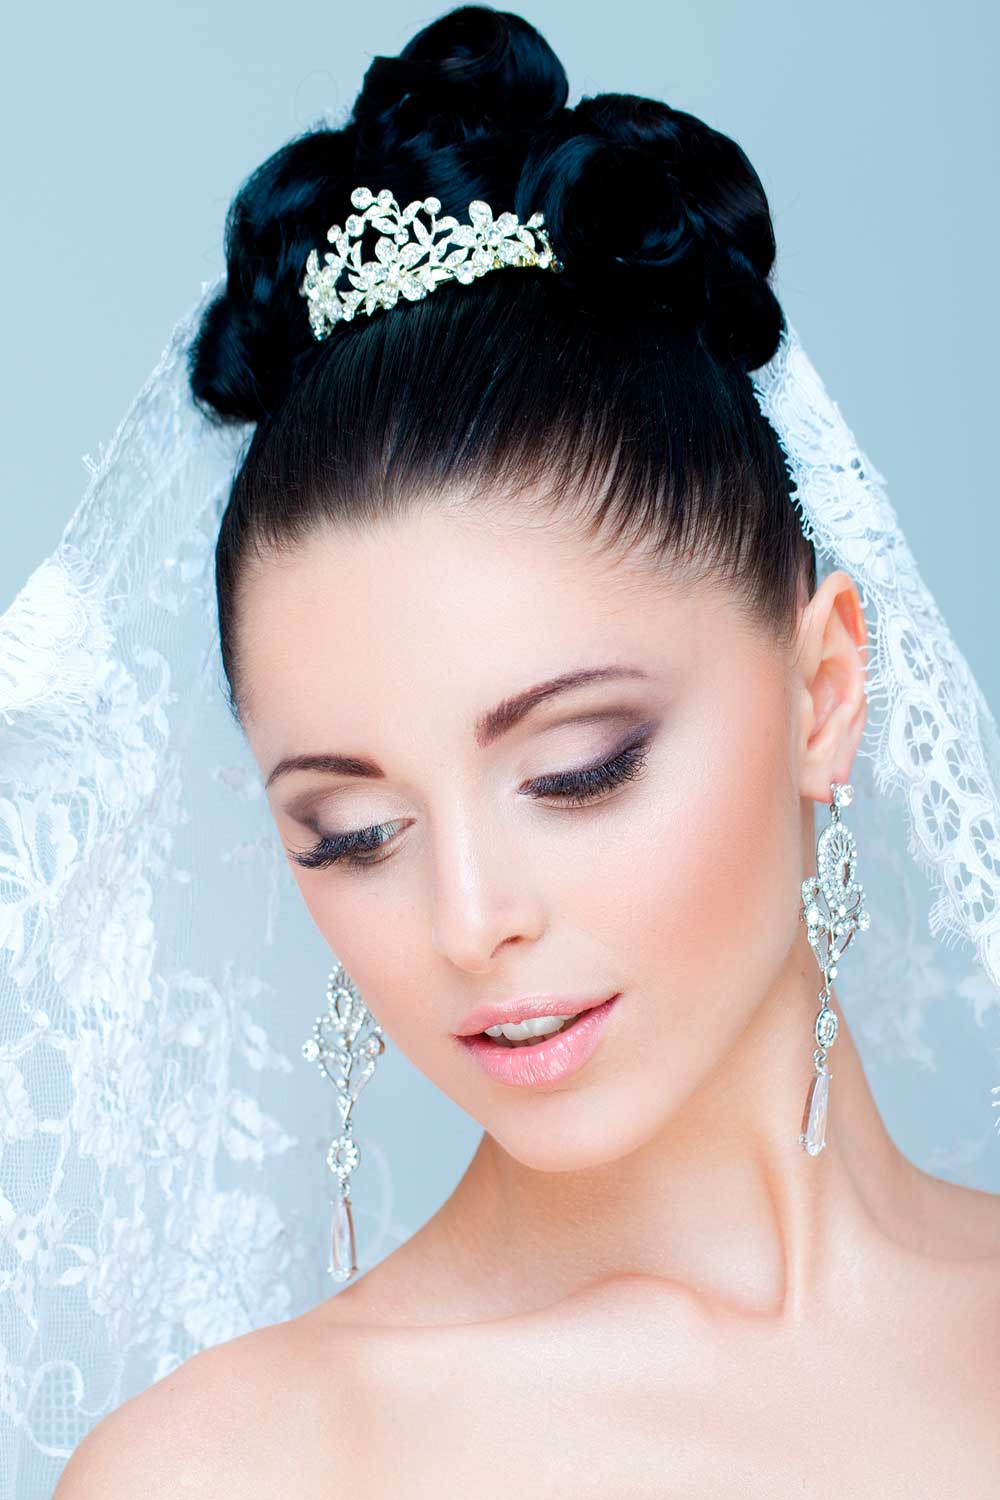 How To Find The Perfect Makeup Specialist For Your Big Day